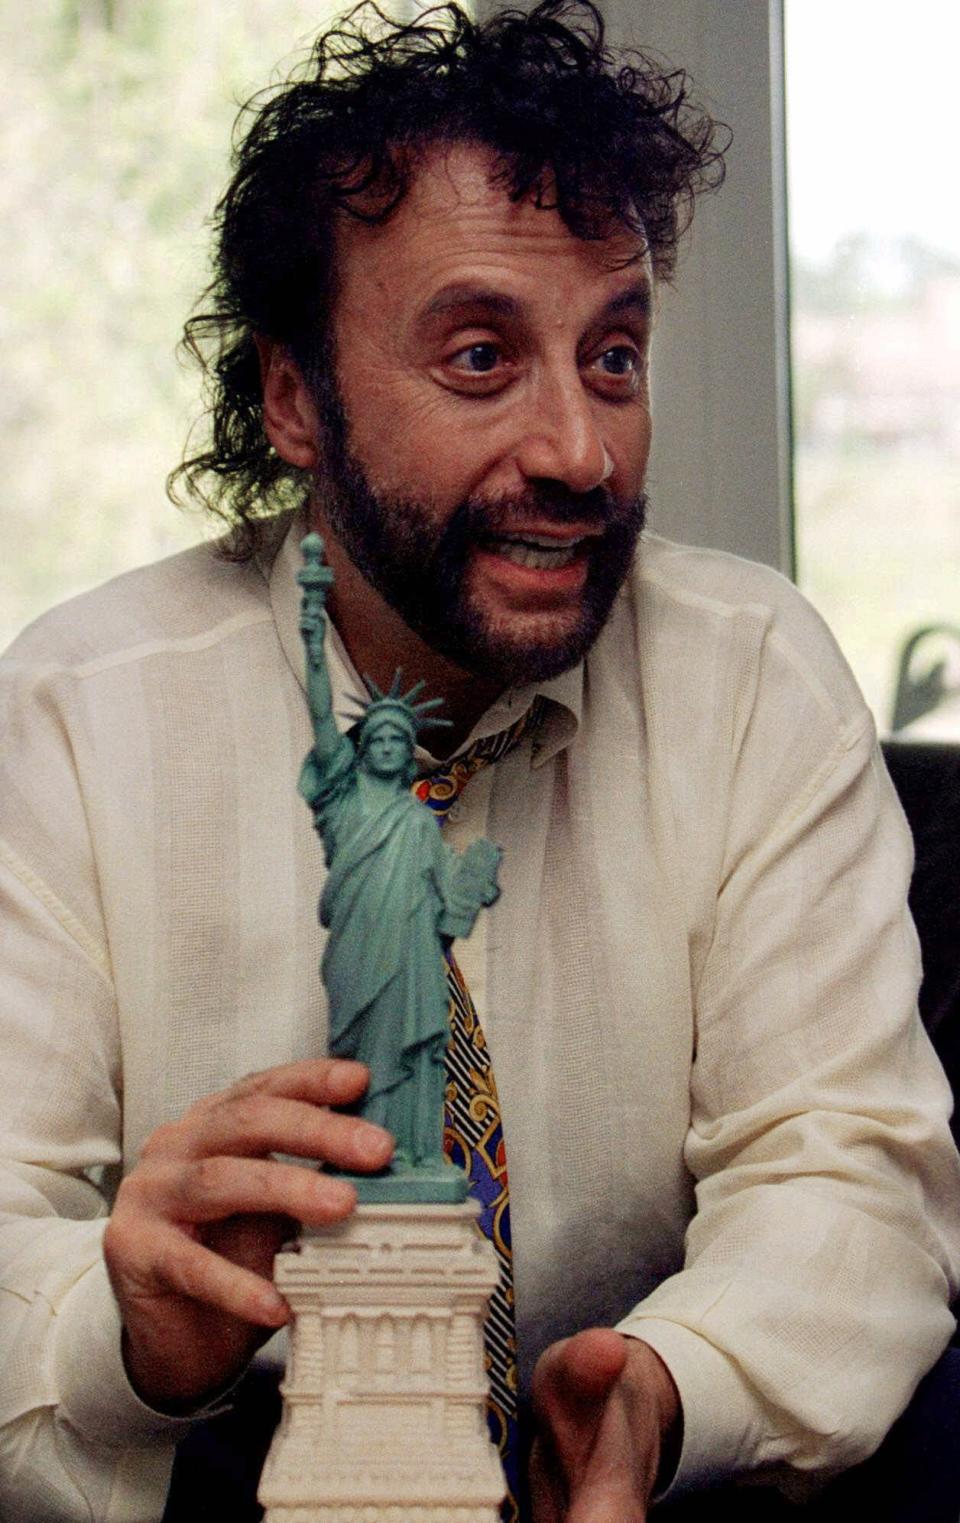 In this June 7, 2001 photo, comedian Yakov Smirnoff talks about his past 15 years as a U.S. citizen during an interview at his Branson theater. Smirnoff is holding the replica of the Statue of Liberty that he held when he was sworn in as a naturalized citizen on July 4, 1986. (AP Photo/John S. Stewart)